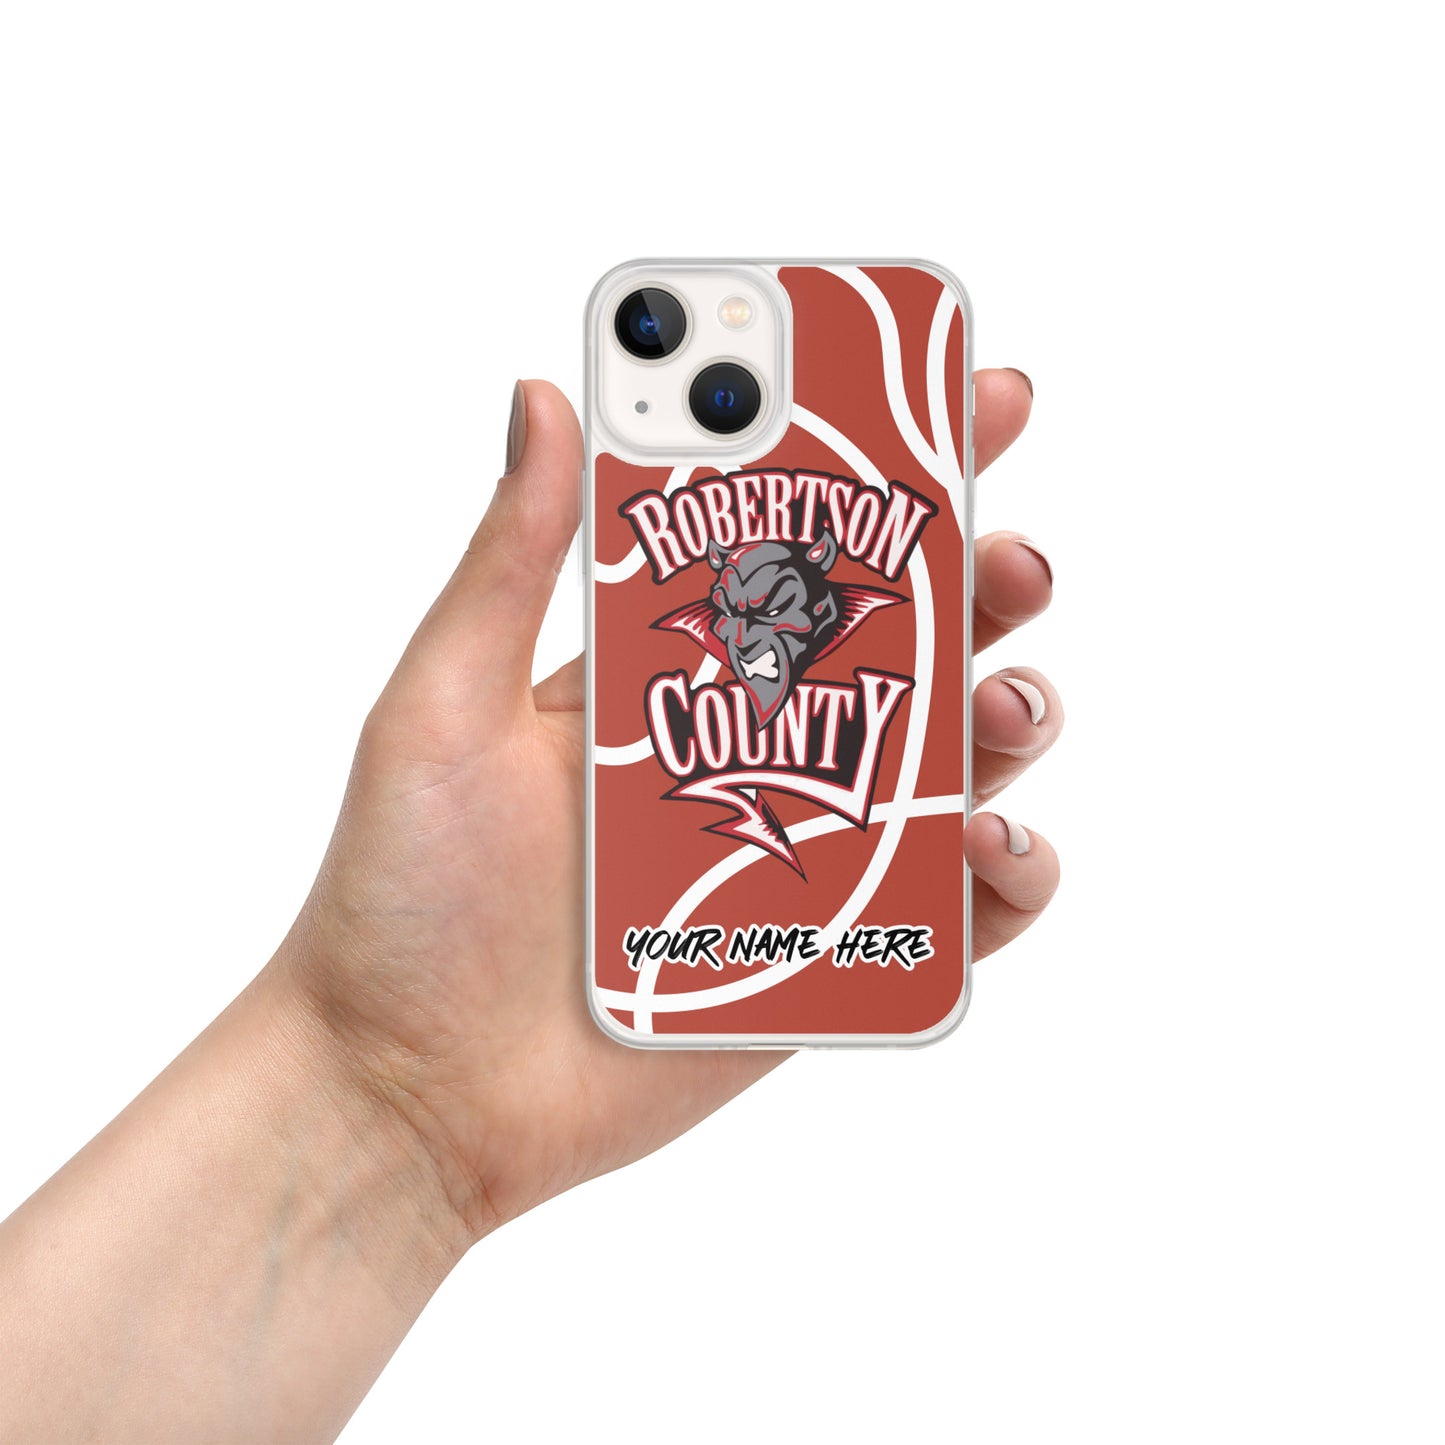 Personalized iPhone Case - Robertson County School